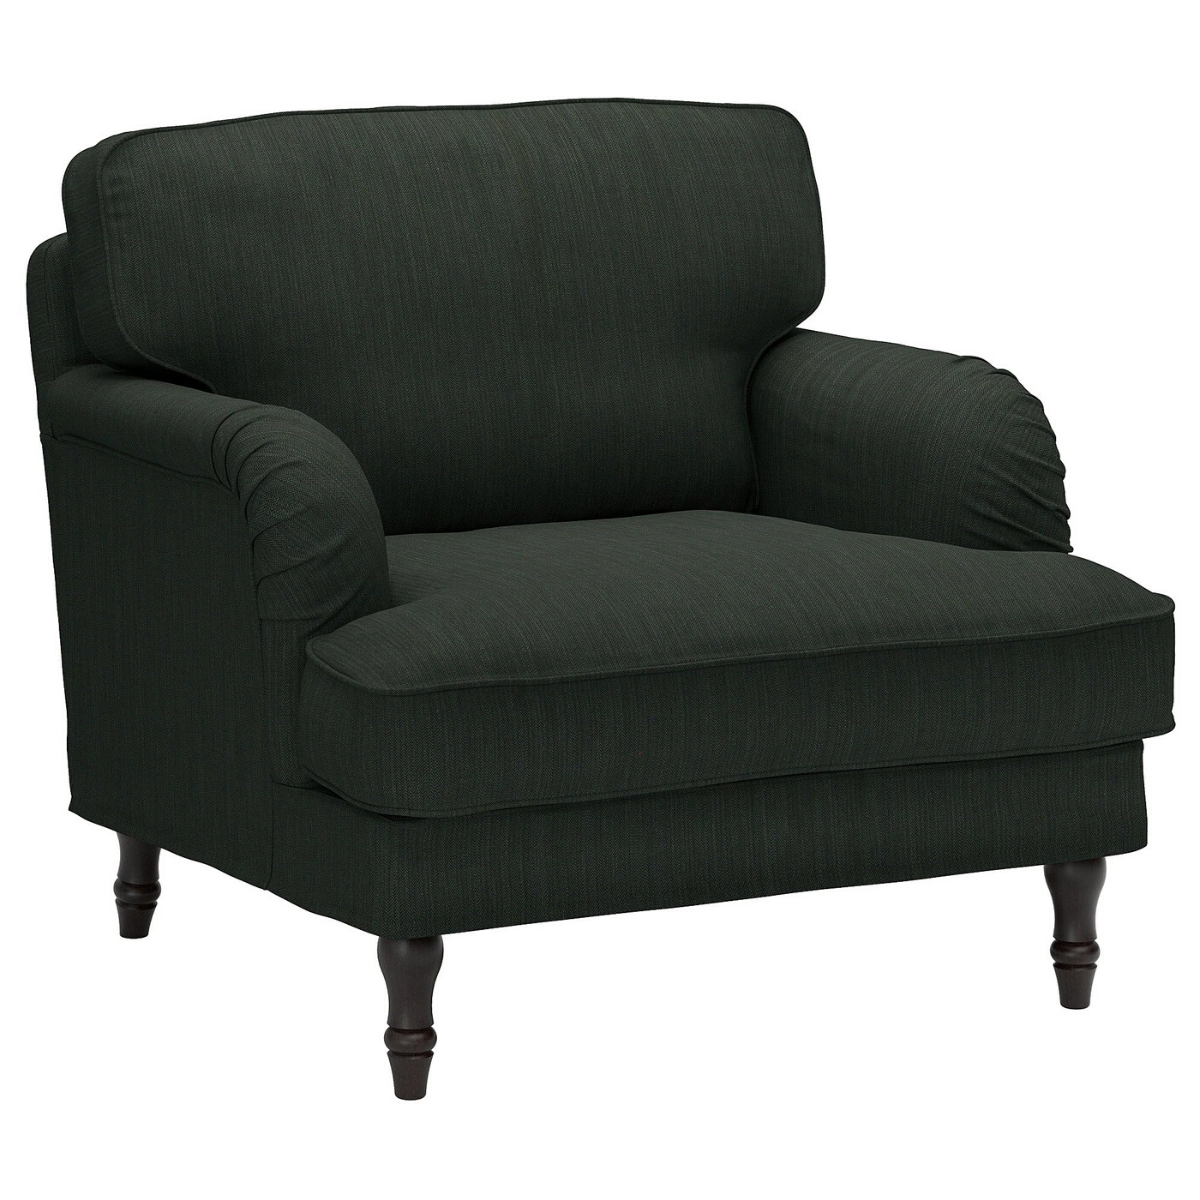 High/Low List: Modern Traditional Furniture & Decor - Hunter green velvet club chair. High end decor and their budget friendly lookalikes. | Nadine Stay